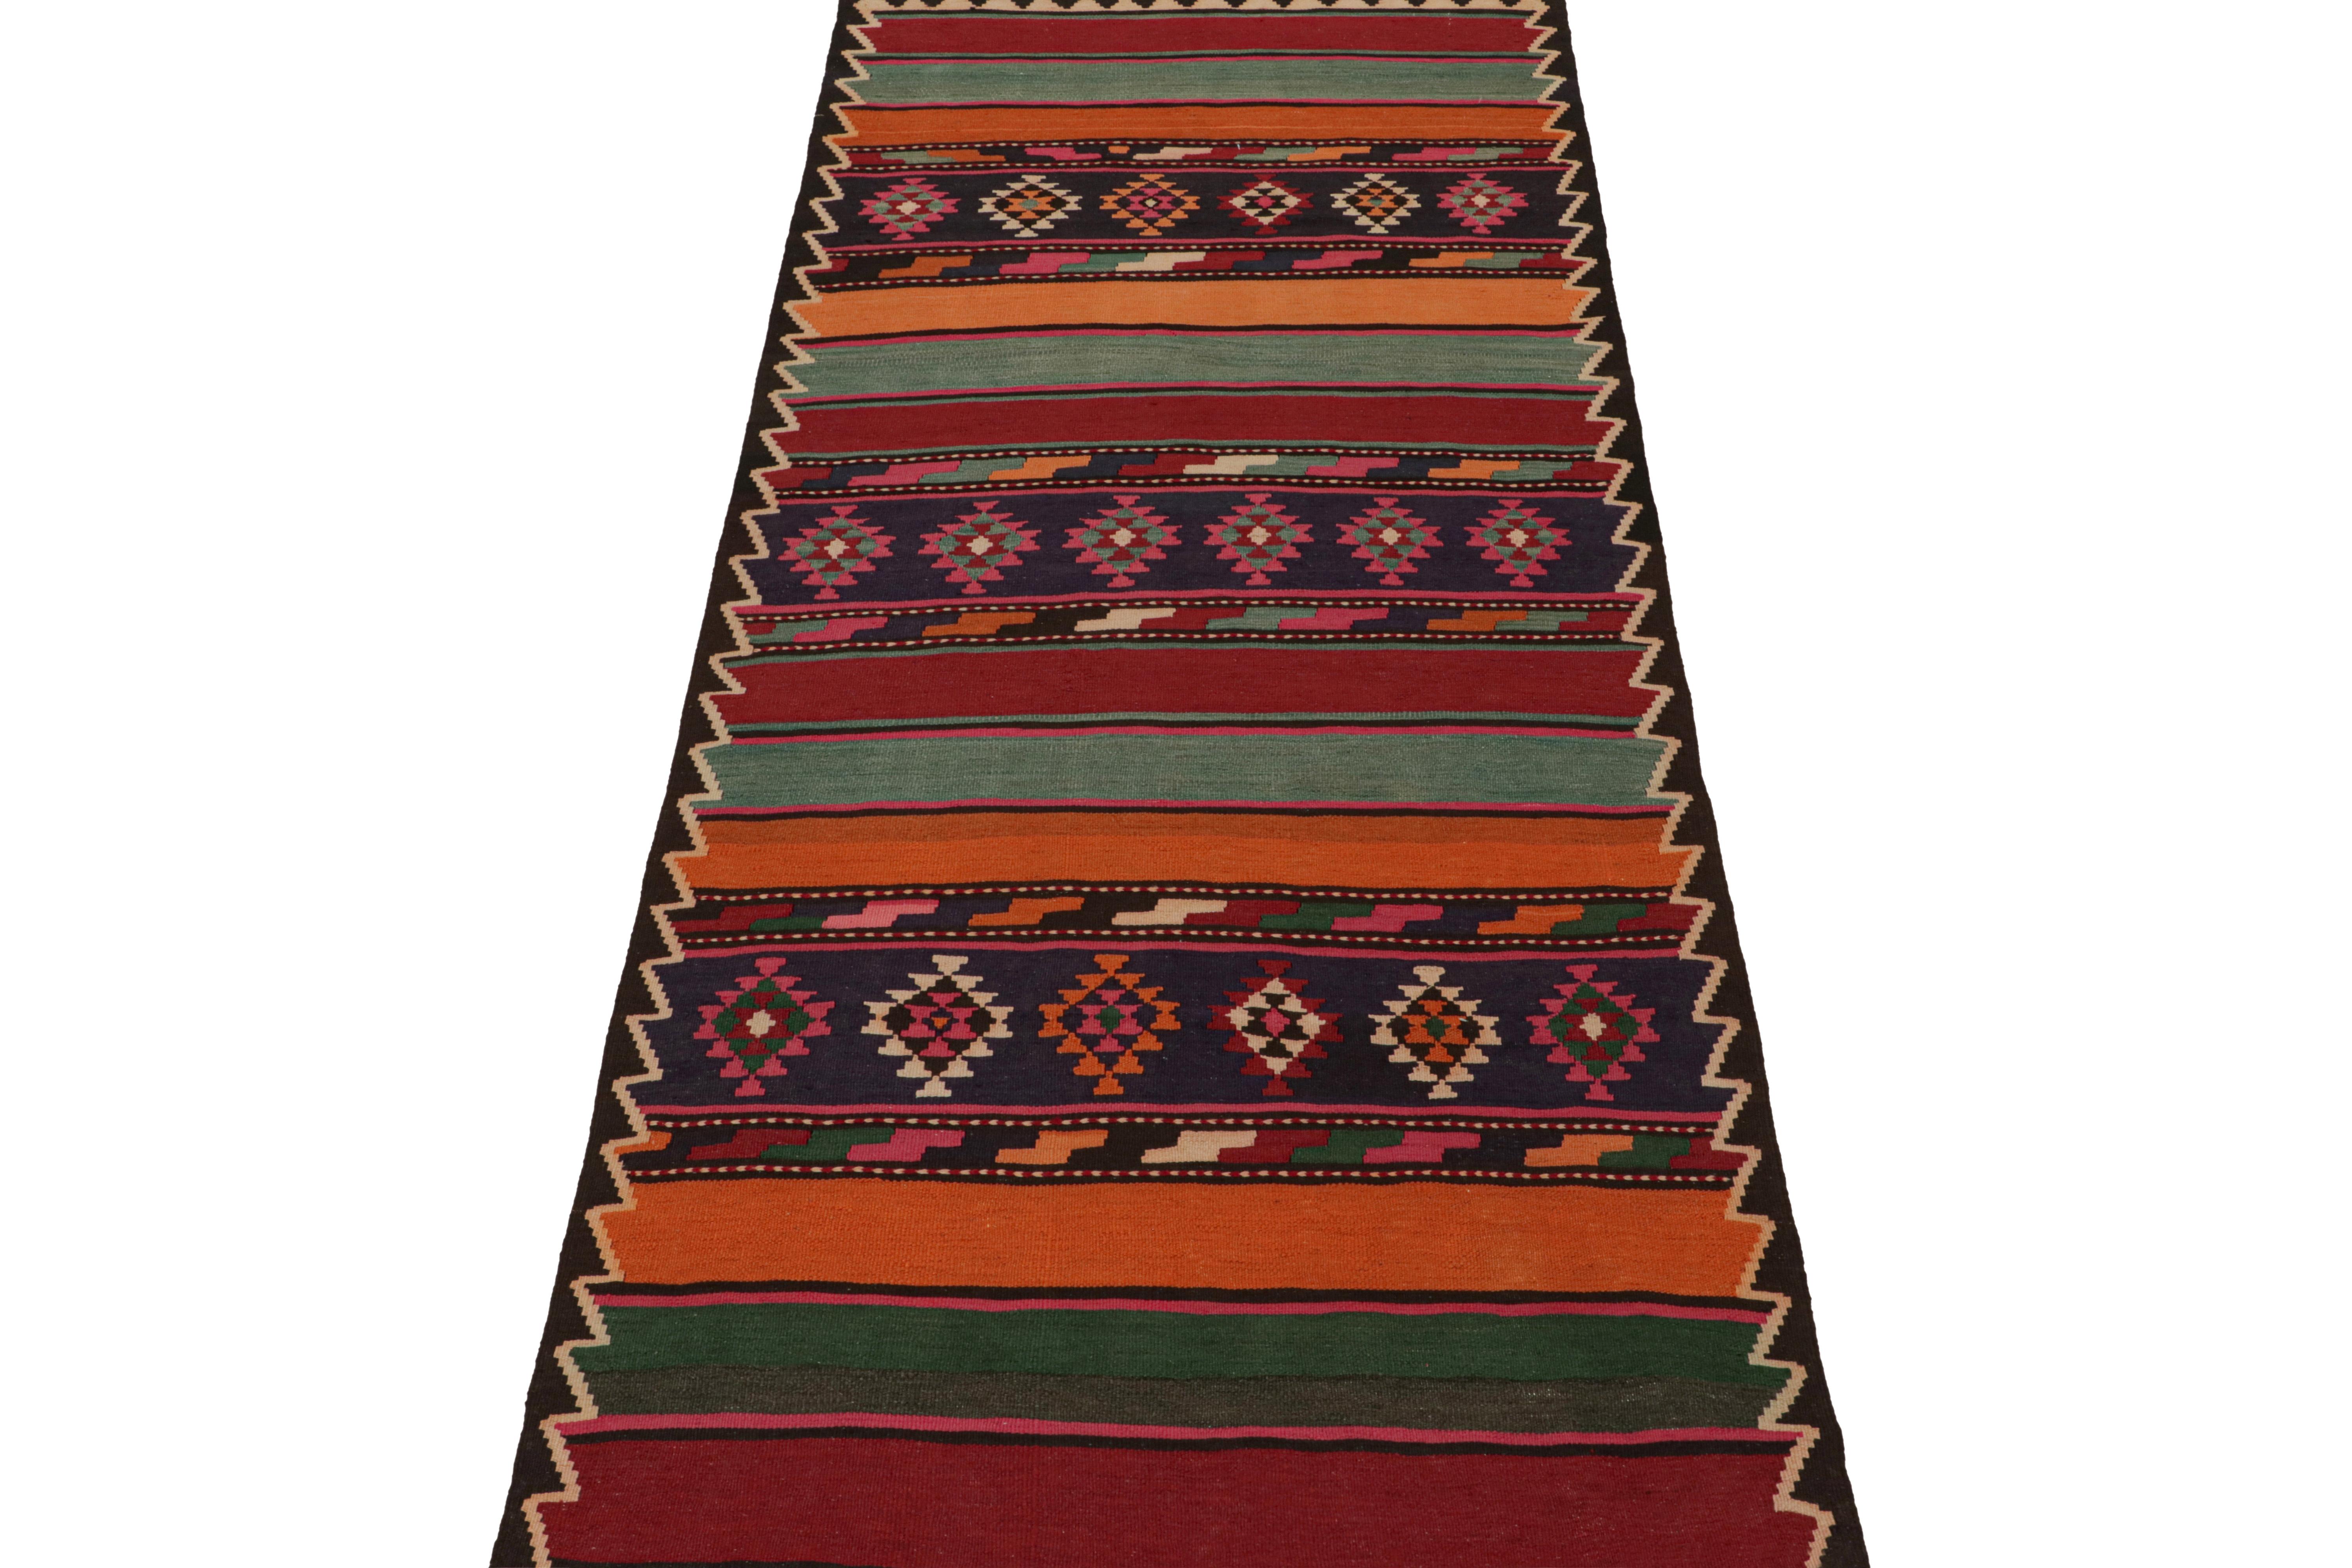 This vintage 5x12 Persian Kilim is a tribal rug from Meshkin—a small northwestern village known for its fabulous works. Handwoven in wool, it originates circa 1950-1960. 
On the Design:
Its design reads a complementary play of traditional